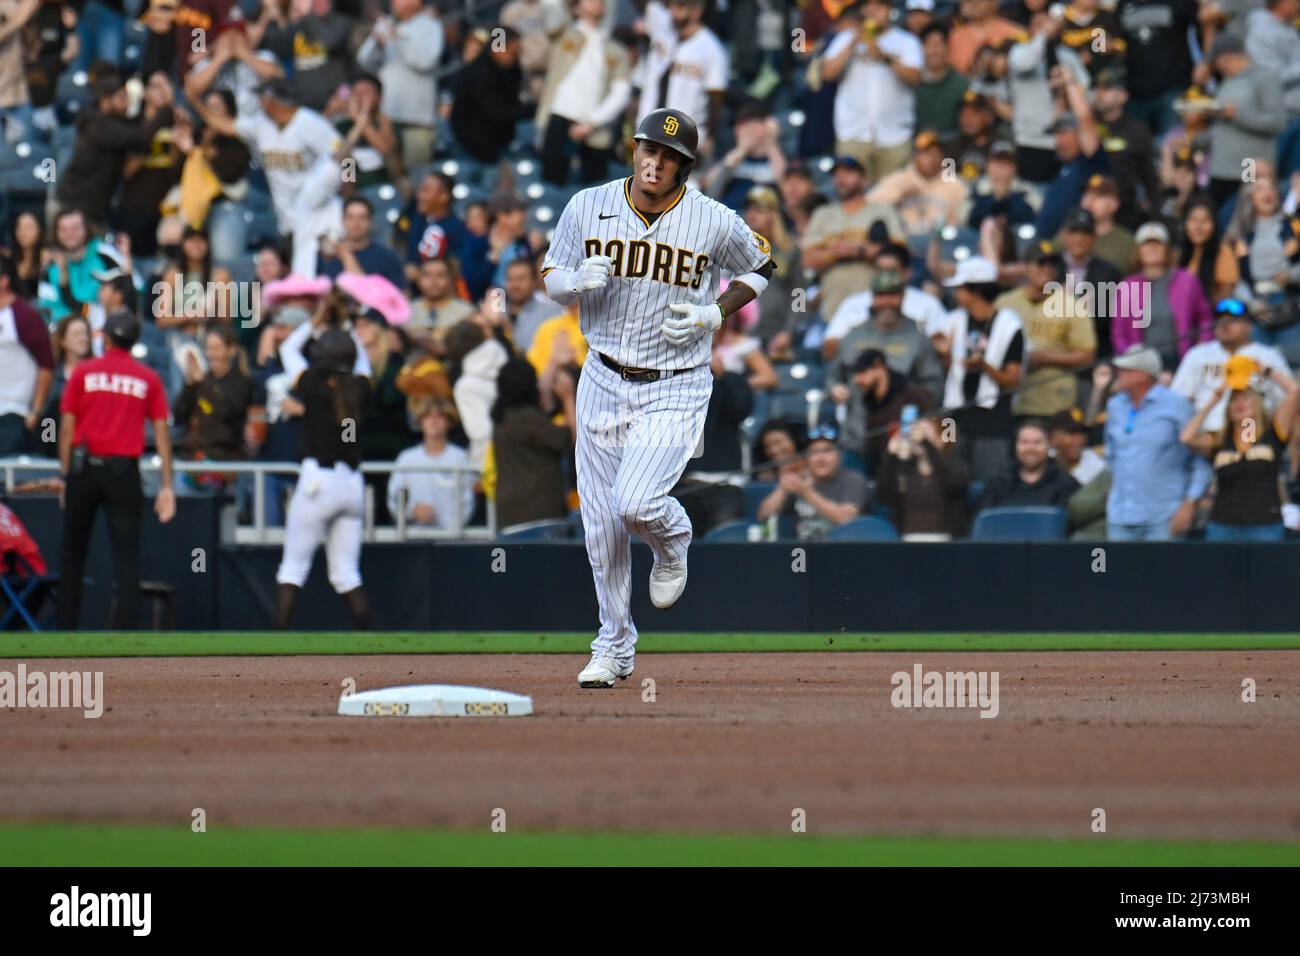 May 05, 2022: San Diego Padres third baseman Manny Machado (13) rounds second base after a home run during the first inning of a MLB baseball game between the Miami Marlins and the San Diego Padres at Petco Park in San Diego, California. Justin Fine/CSM Stock Photo